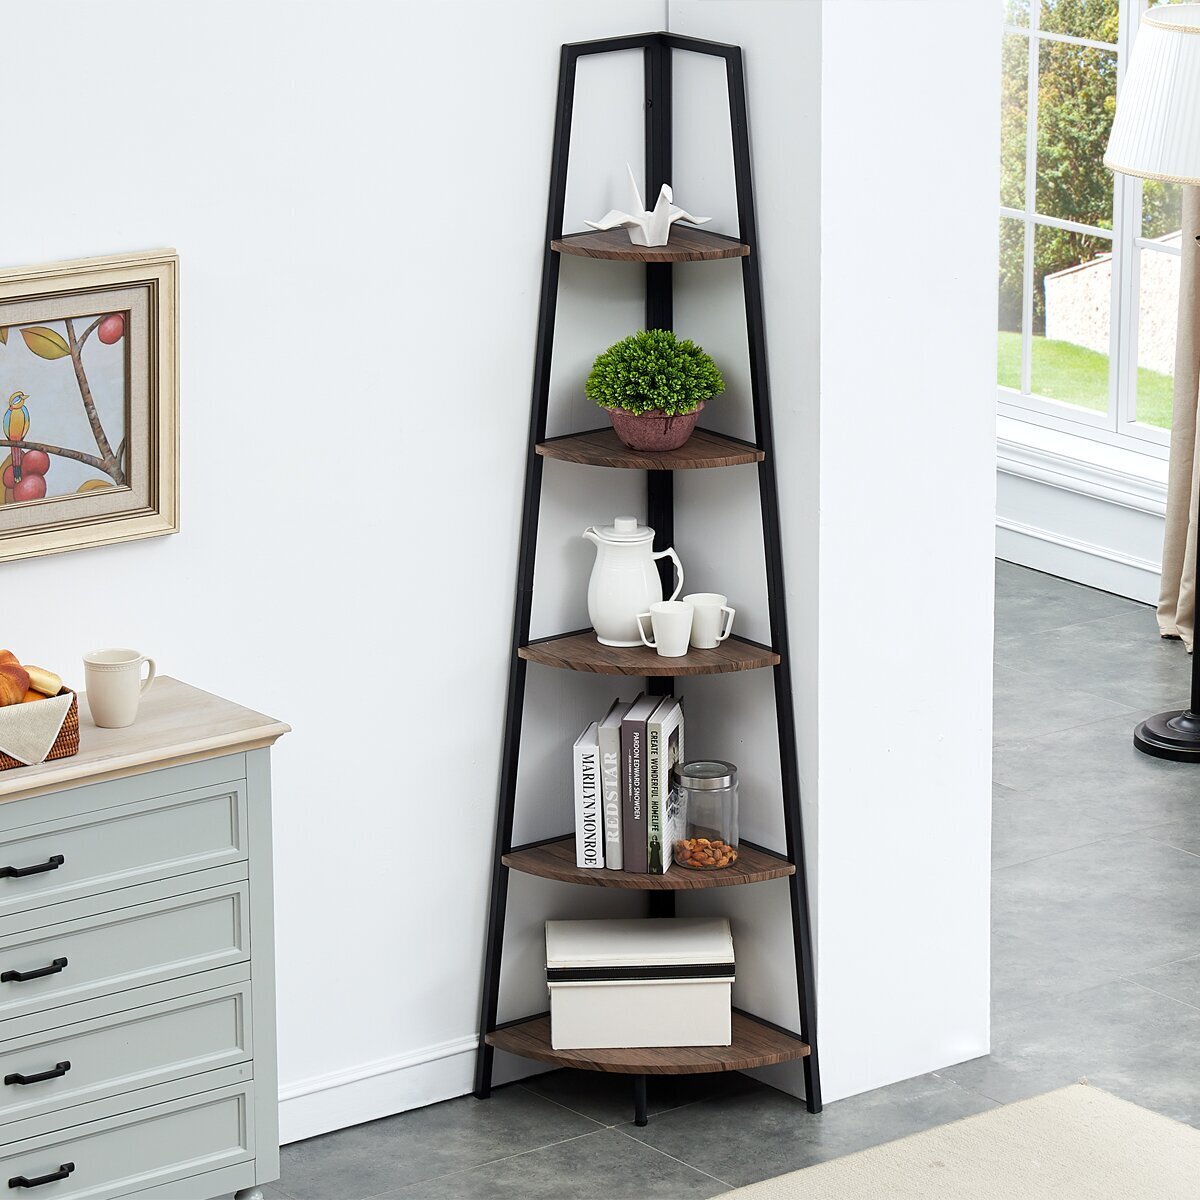 Tall Corner Shelf With a Tapered Look